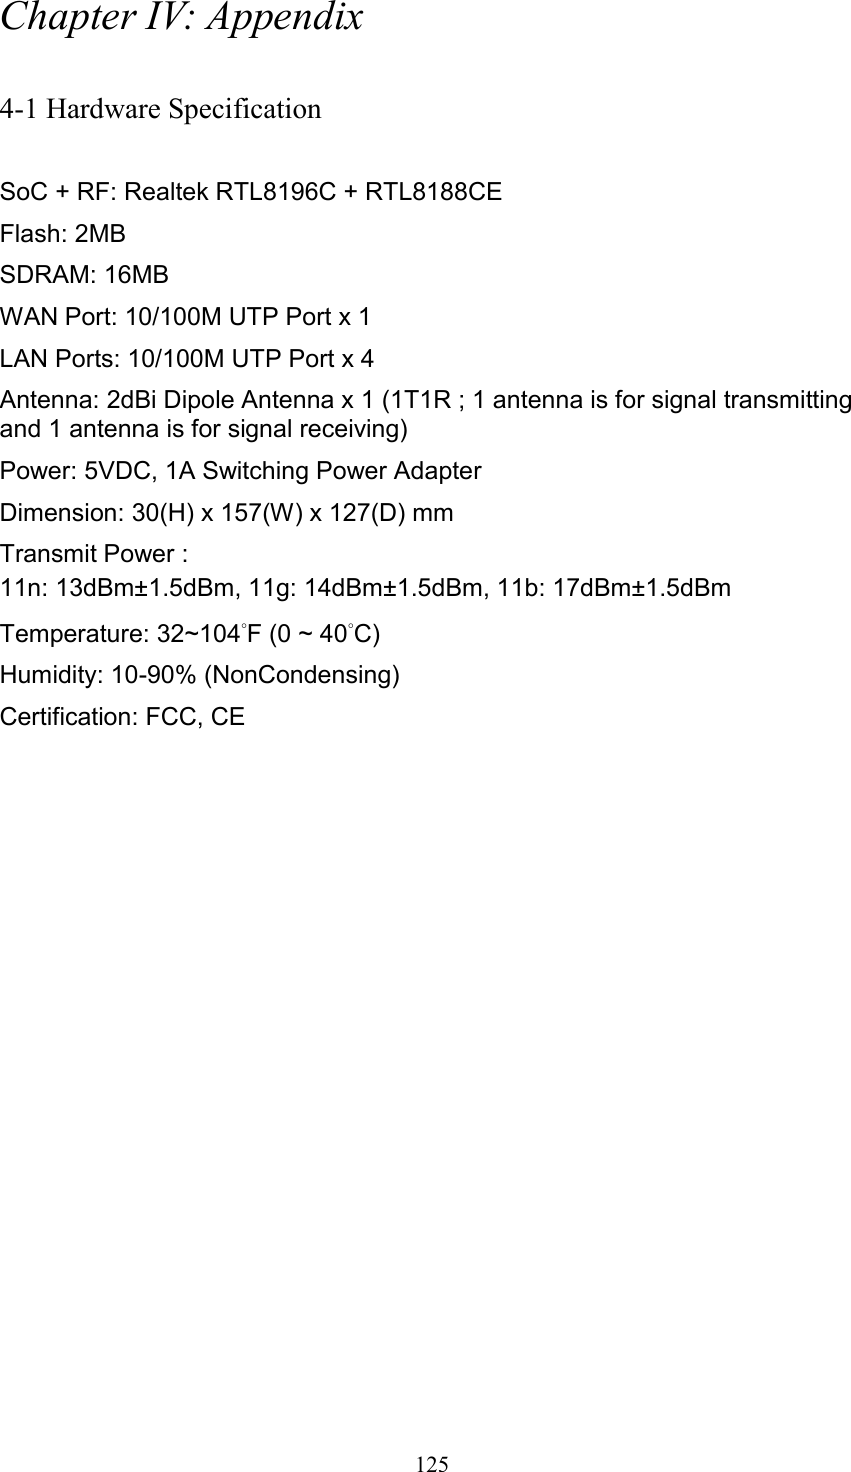  125 Chapter IV: Appendix  4-1 Hardware Specification  SoC + RF: Realtek RTL8196C + RTL8188CE Flash: 2MB   SDRAM: 16MB   WAN Port: 10/100M UTP Port x 1 LAN Ports: 10/100M UTP Port x 4 Antenna: 2dBi Dipole Antenna x 1 (1T1R ; 1 antenna is for signal transmitting and 1 antenna is for signal receiving) Power: 5VDC, 1A Switching Power Adapter Dimension: 30(H) x 157(W) x 127(D) mm   Transmit Power : 11n: 13dBm±1.5dBm, 11g: 14dBm±1.5dBm, 11b: 17dBm±1.5dBm   Temperature: 32~104°F (0 ~ 40°C) Humidity: 10-90% (NonCondensing) Certification: FCC, CE 